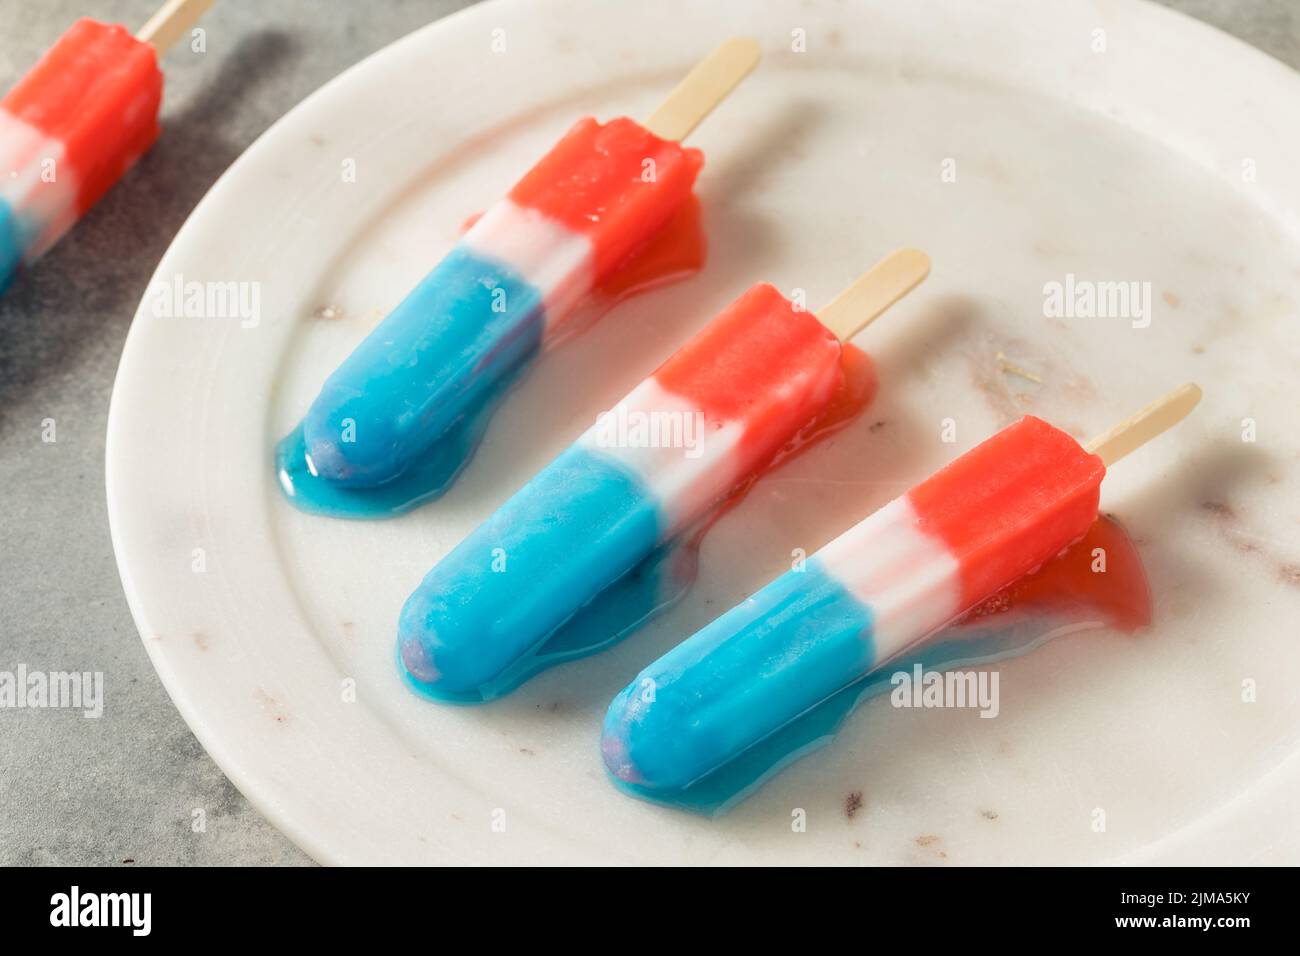 Homemade Red White Blue Popsicle Ready to Eat for the Summer Stock Photo